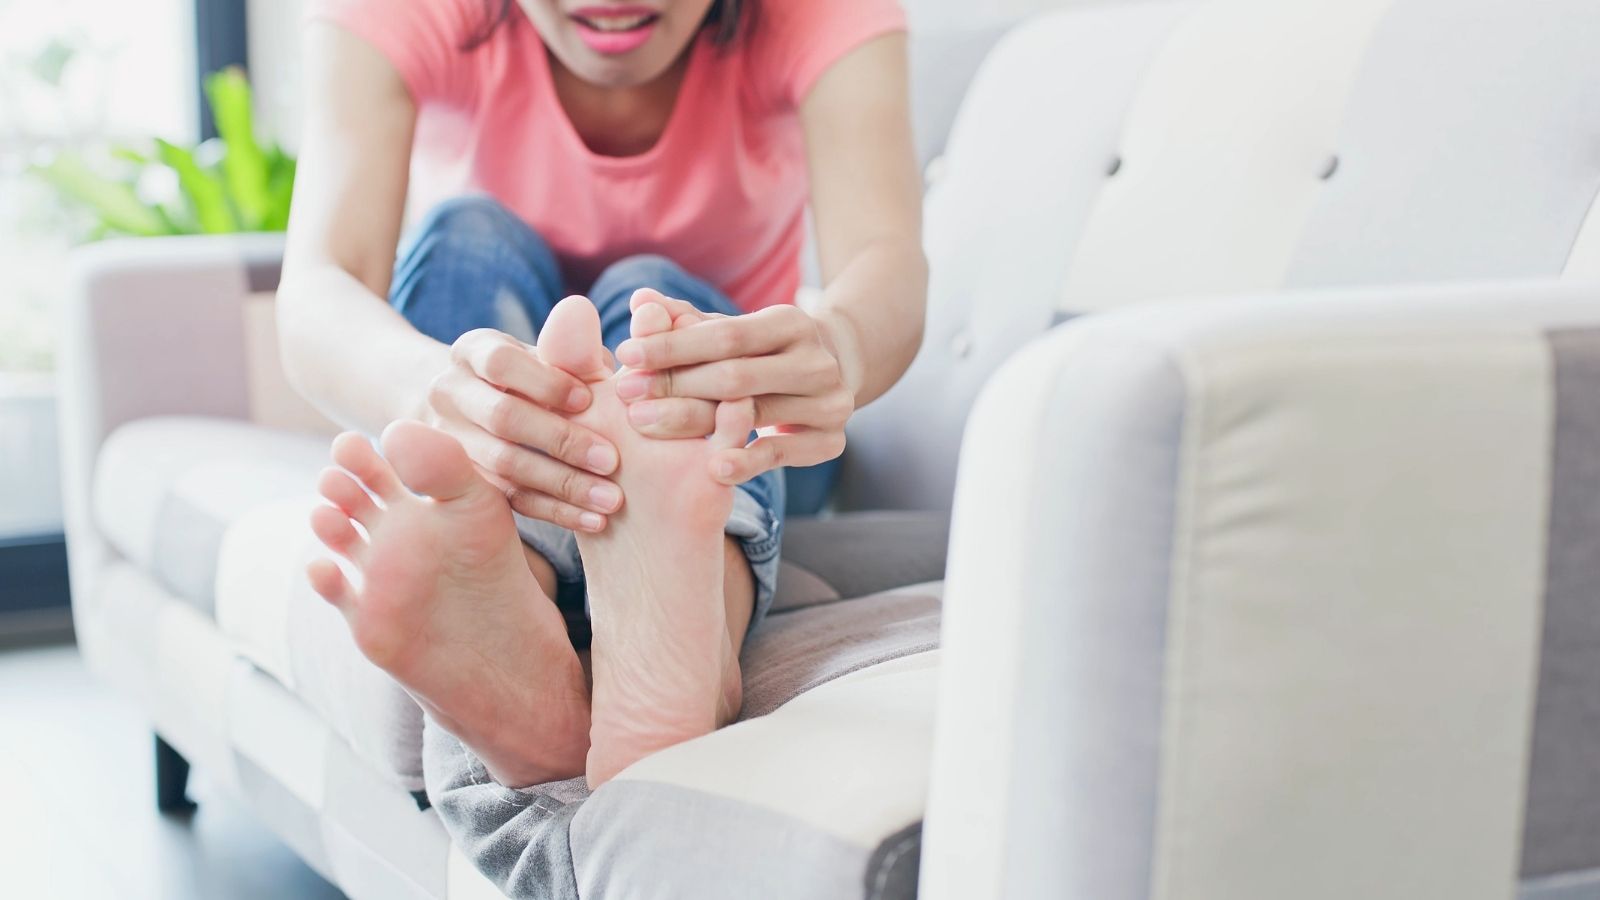 Woman looking between her toes at her athlete's foot